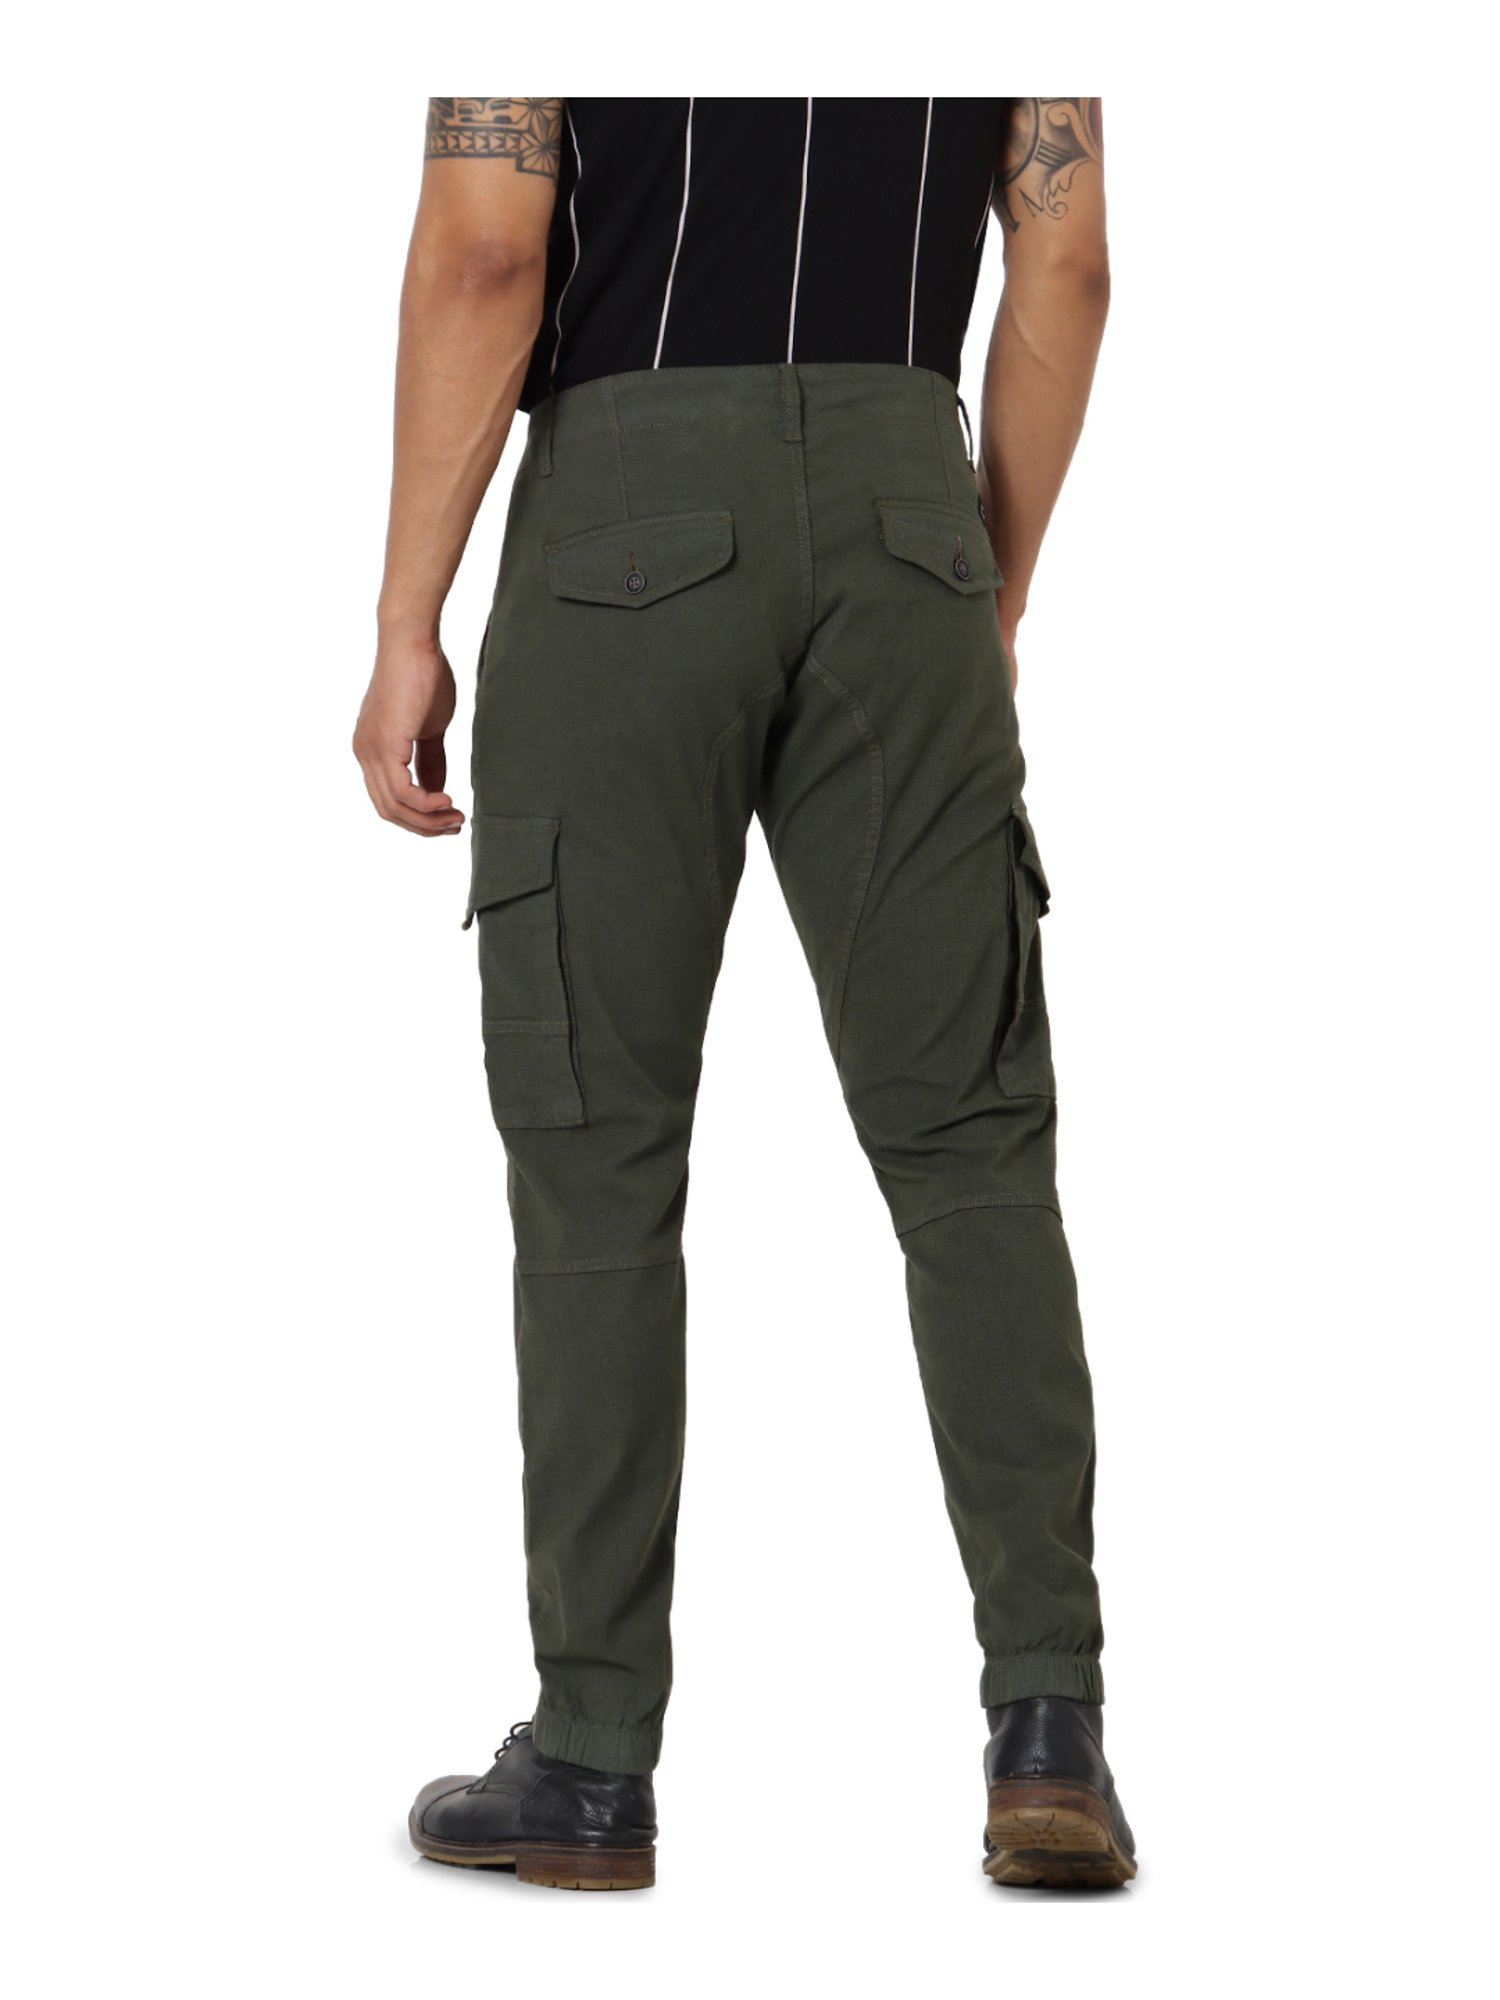 jack  jones mens casual trousers at Best Price  1398 with many options  Only in India at MartAvenuecom  Mart Avenue  MartAvenue